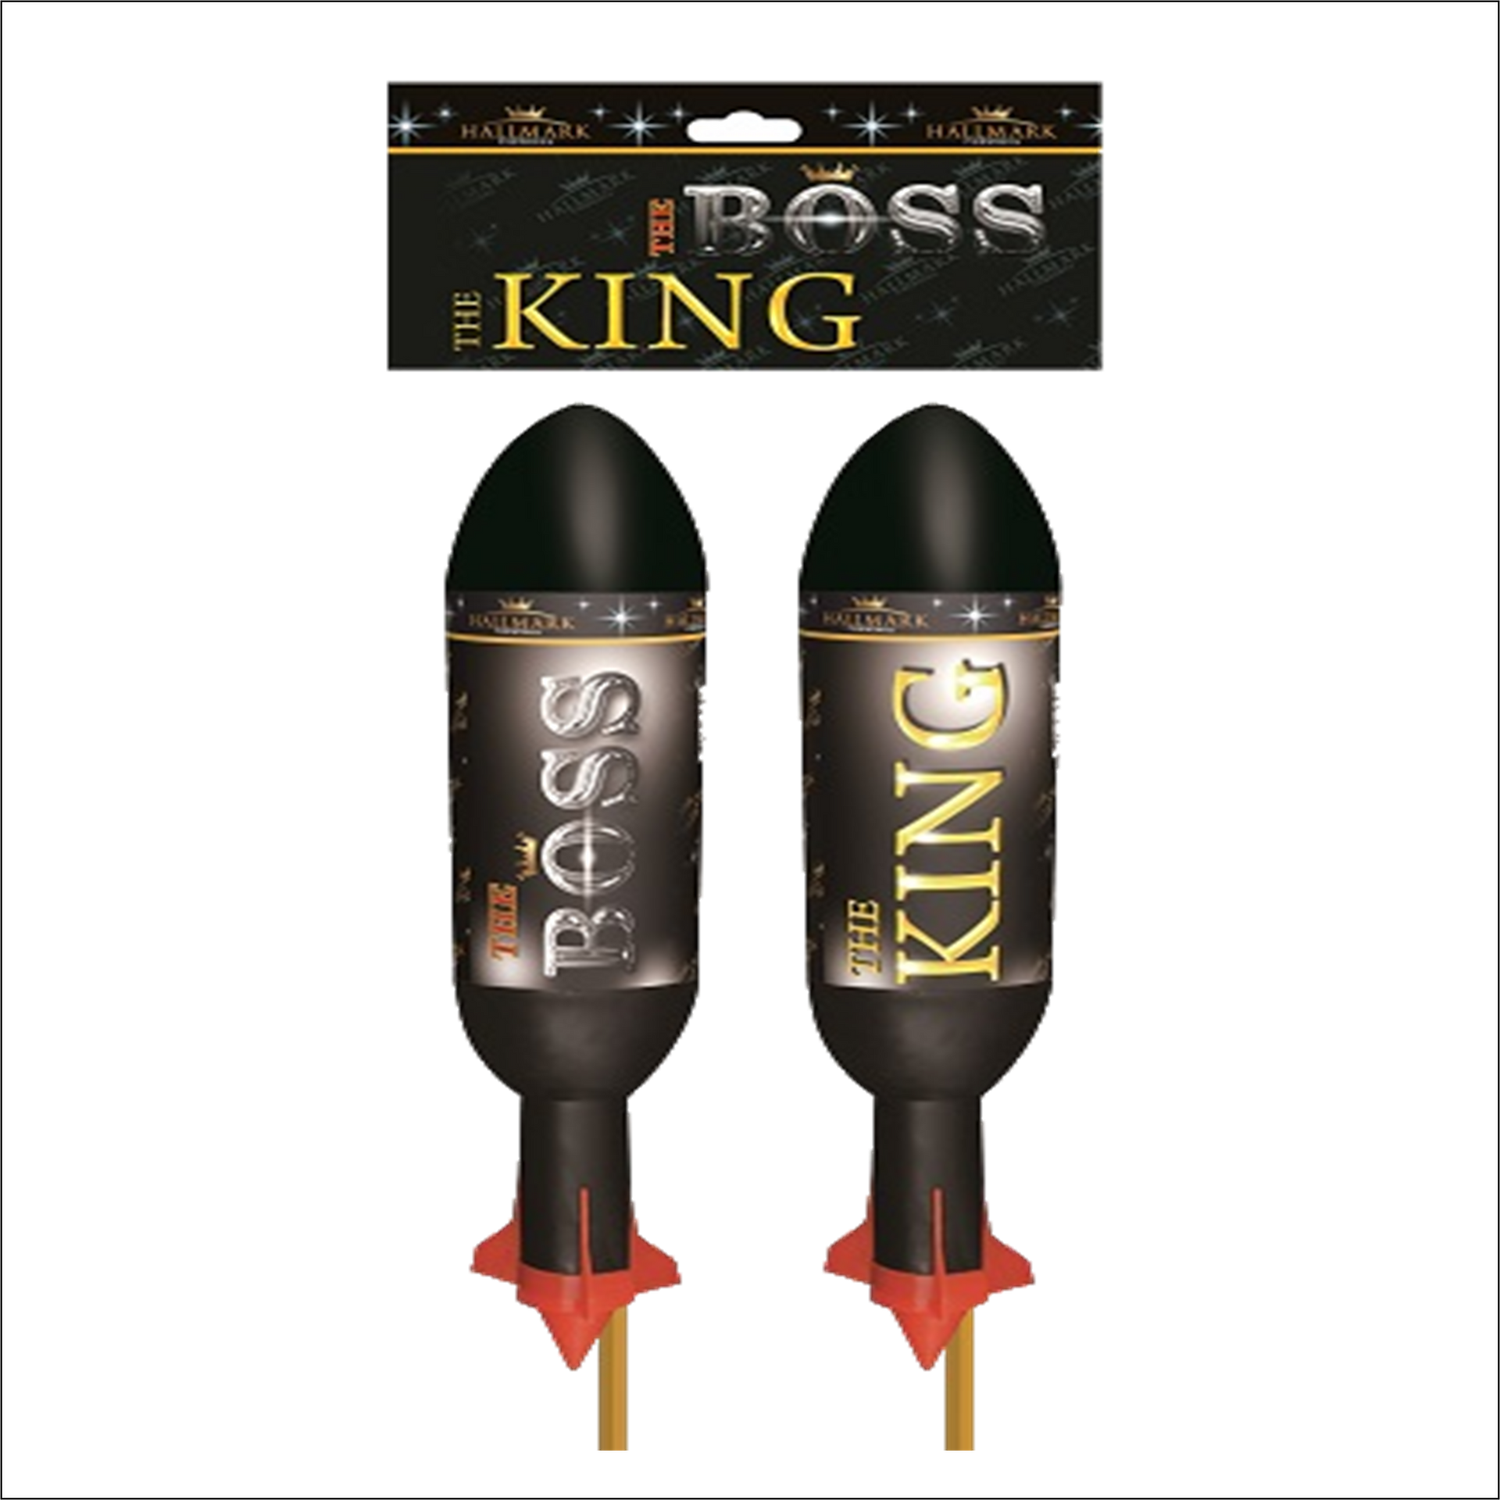 THE BOSS THE KING (2 ROCKETS)